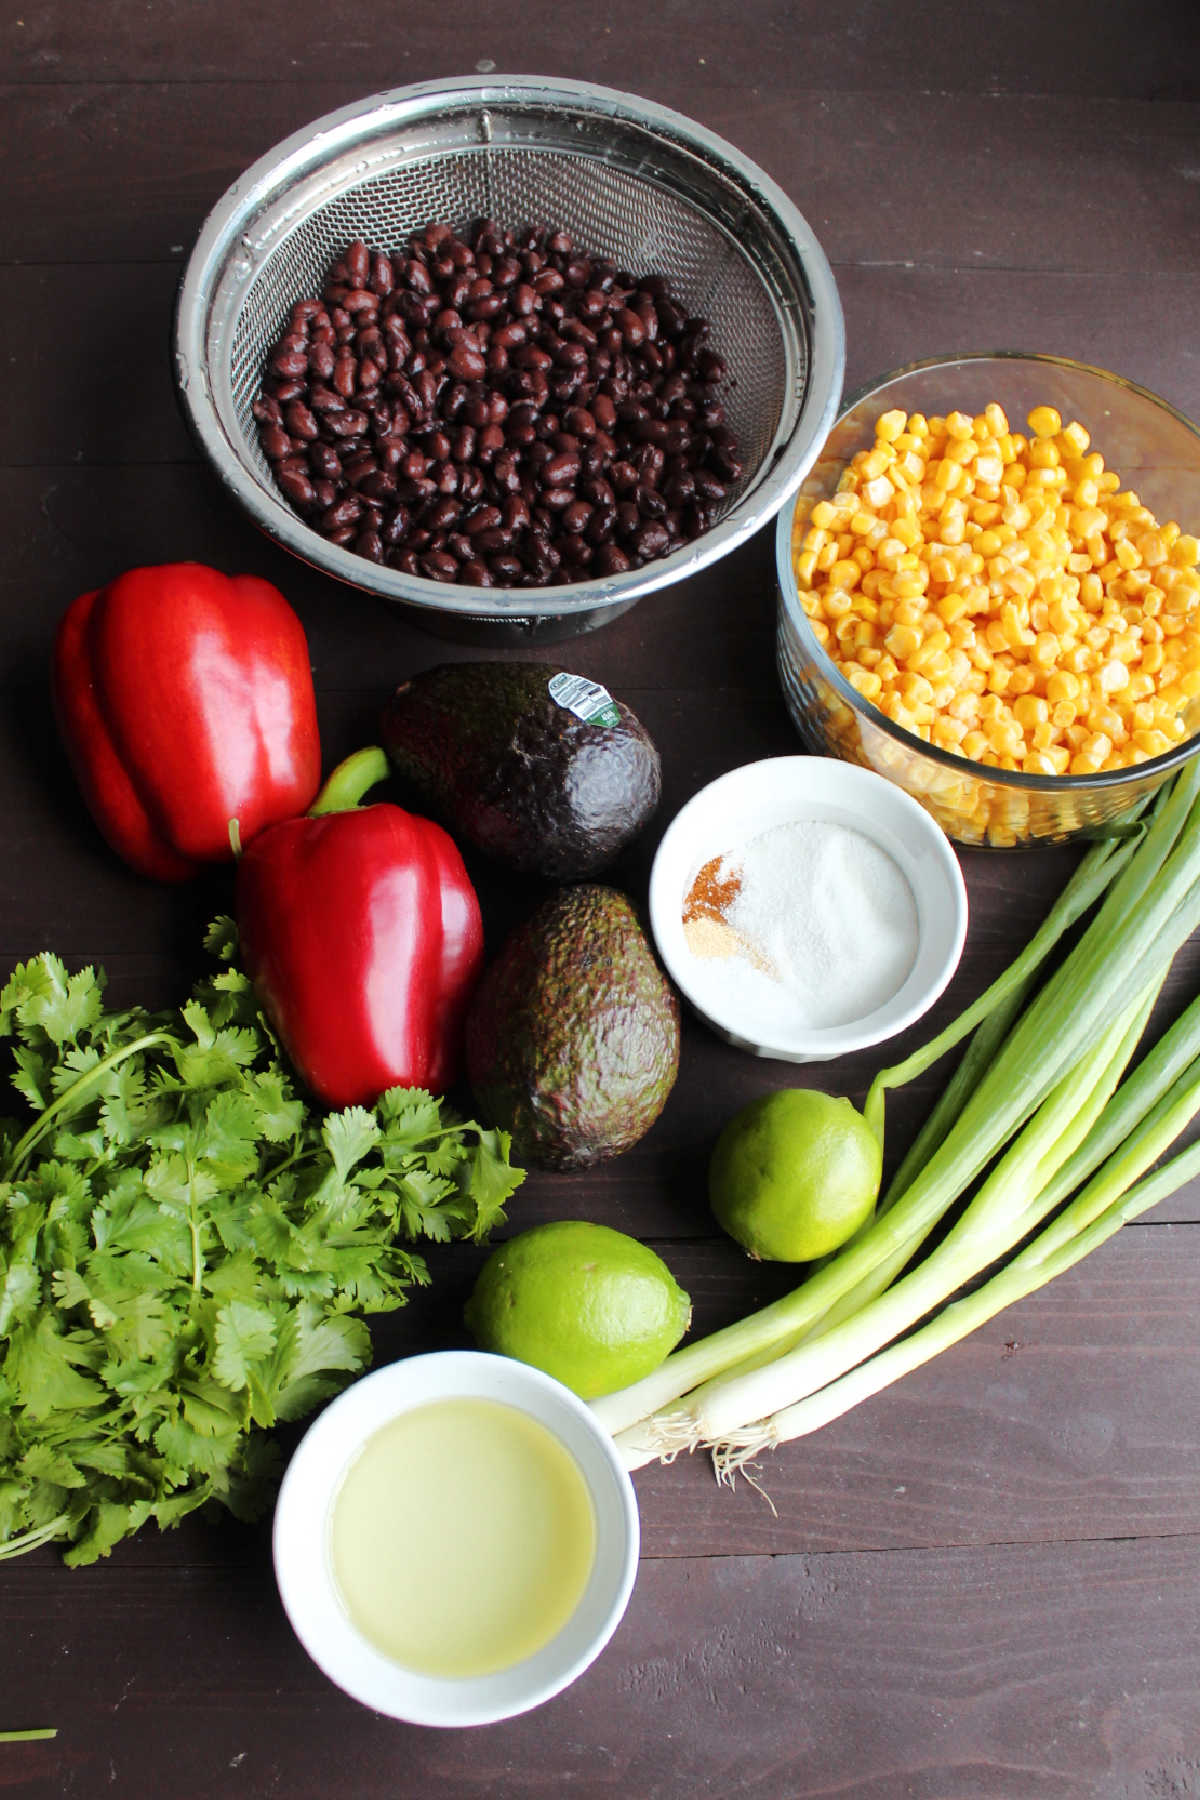 Ingredients: black beans, corn, red pepper, avocados, lime, oil, green onions, cilantro and seasonings ready to be made into salad.